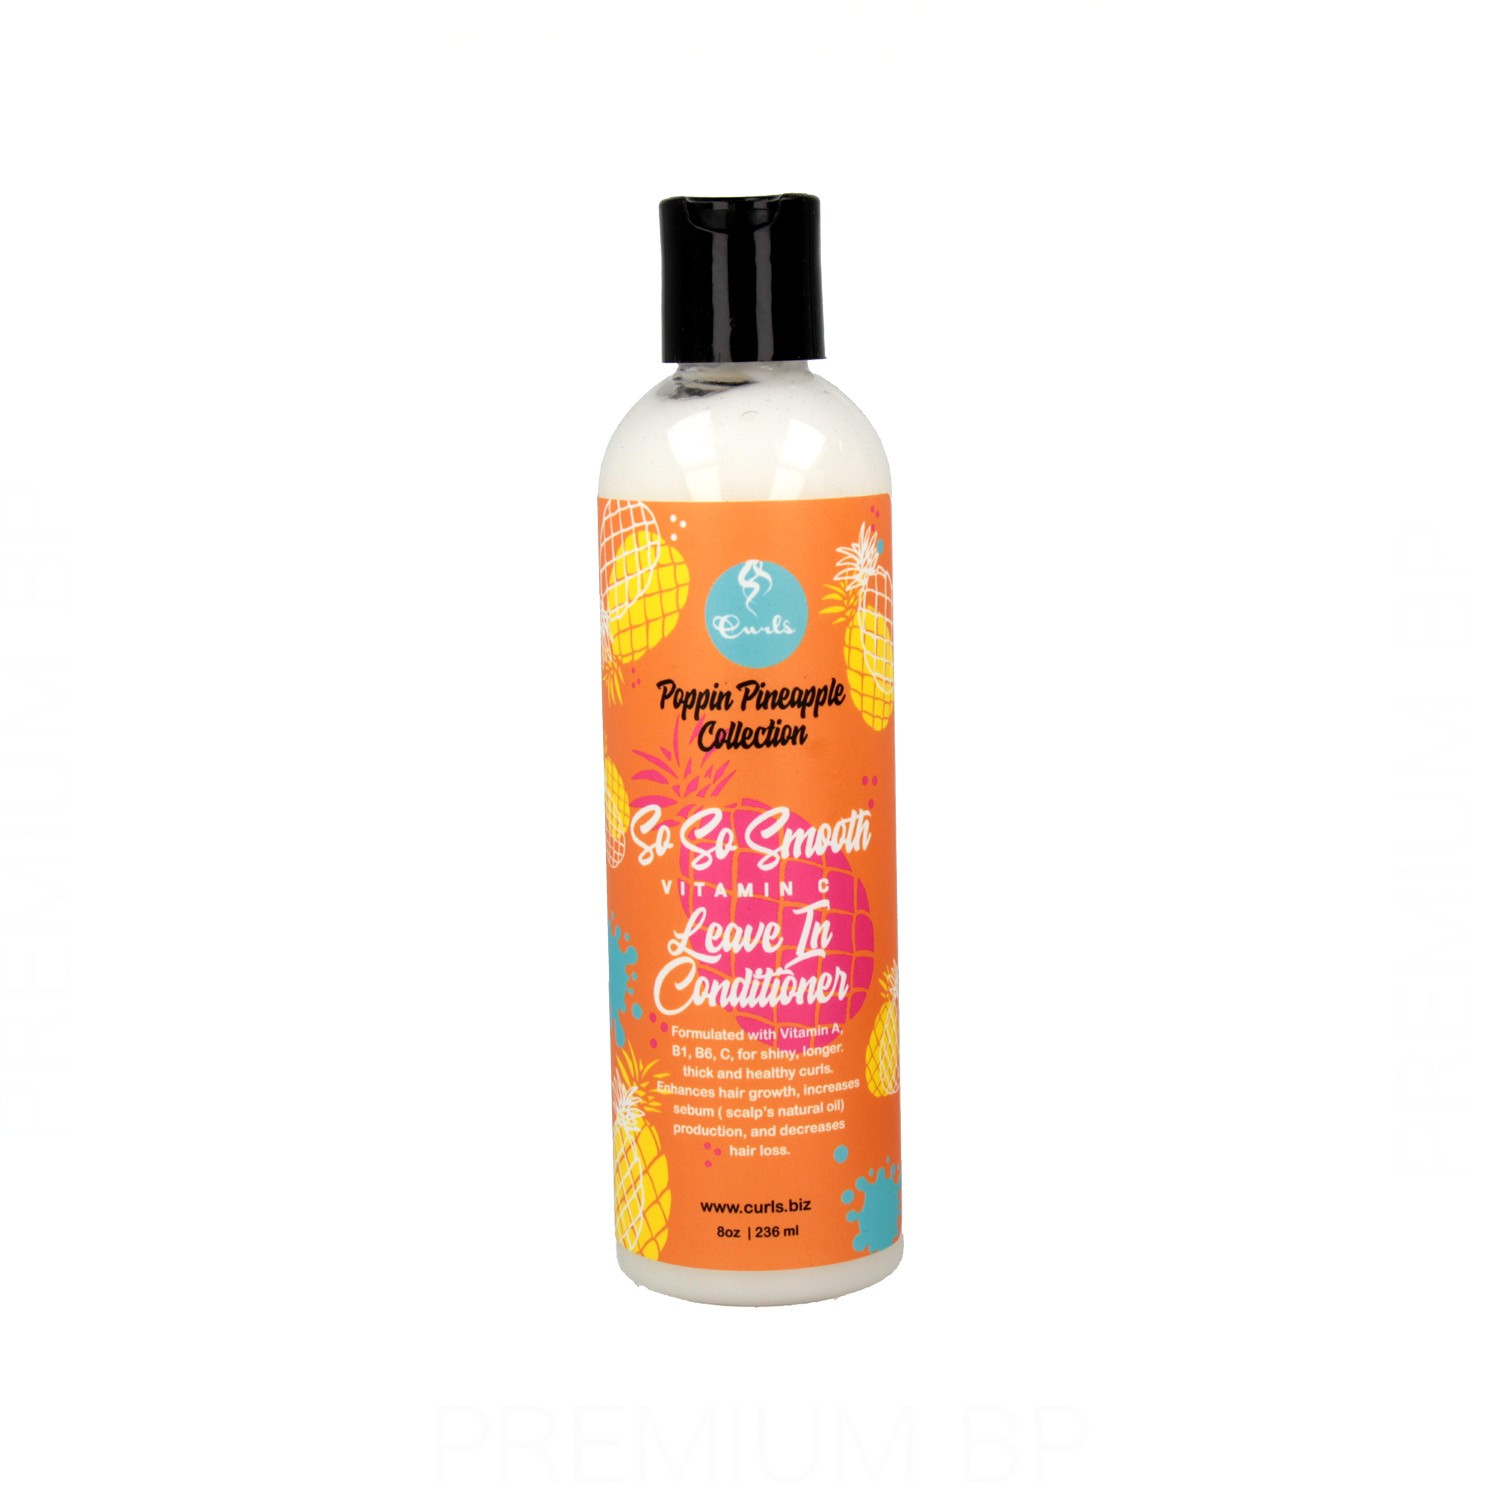 Curls Poppin Pineapple Collection So So Smooth après-shampooing sans rinçage 236 ml